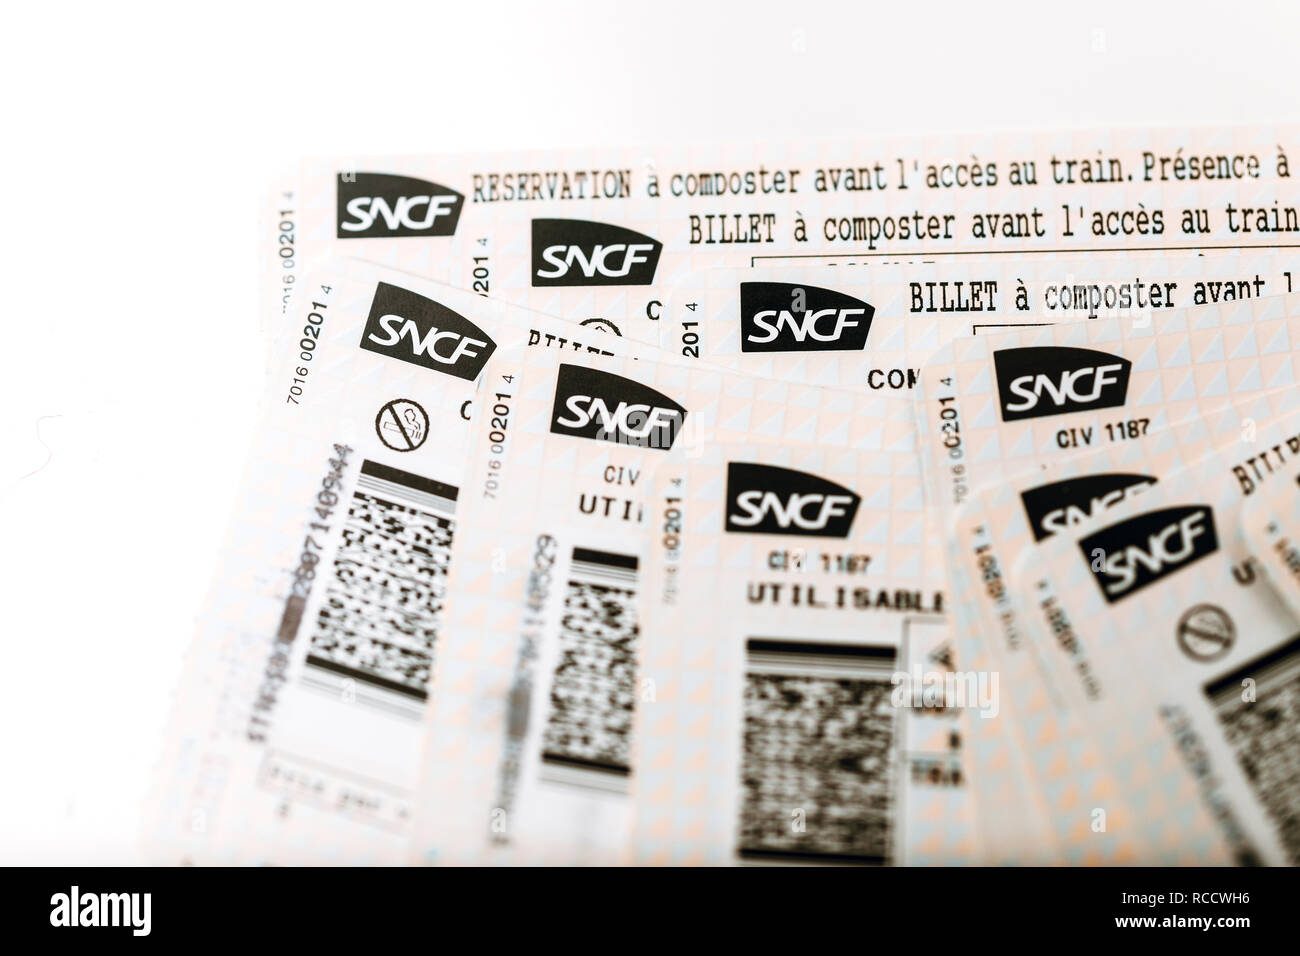 PARIS, FRANCE - JAN 14, 2015: View from above of SNCF Societe nationale des chemins de fer francais train tickets seen from above randomly arranged on a table Stock Photo